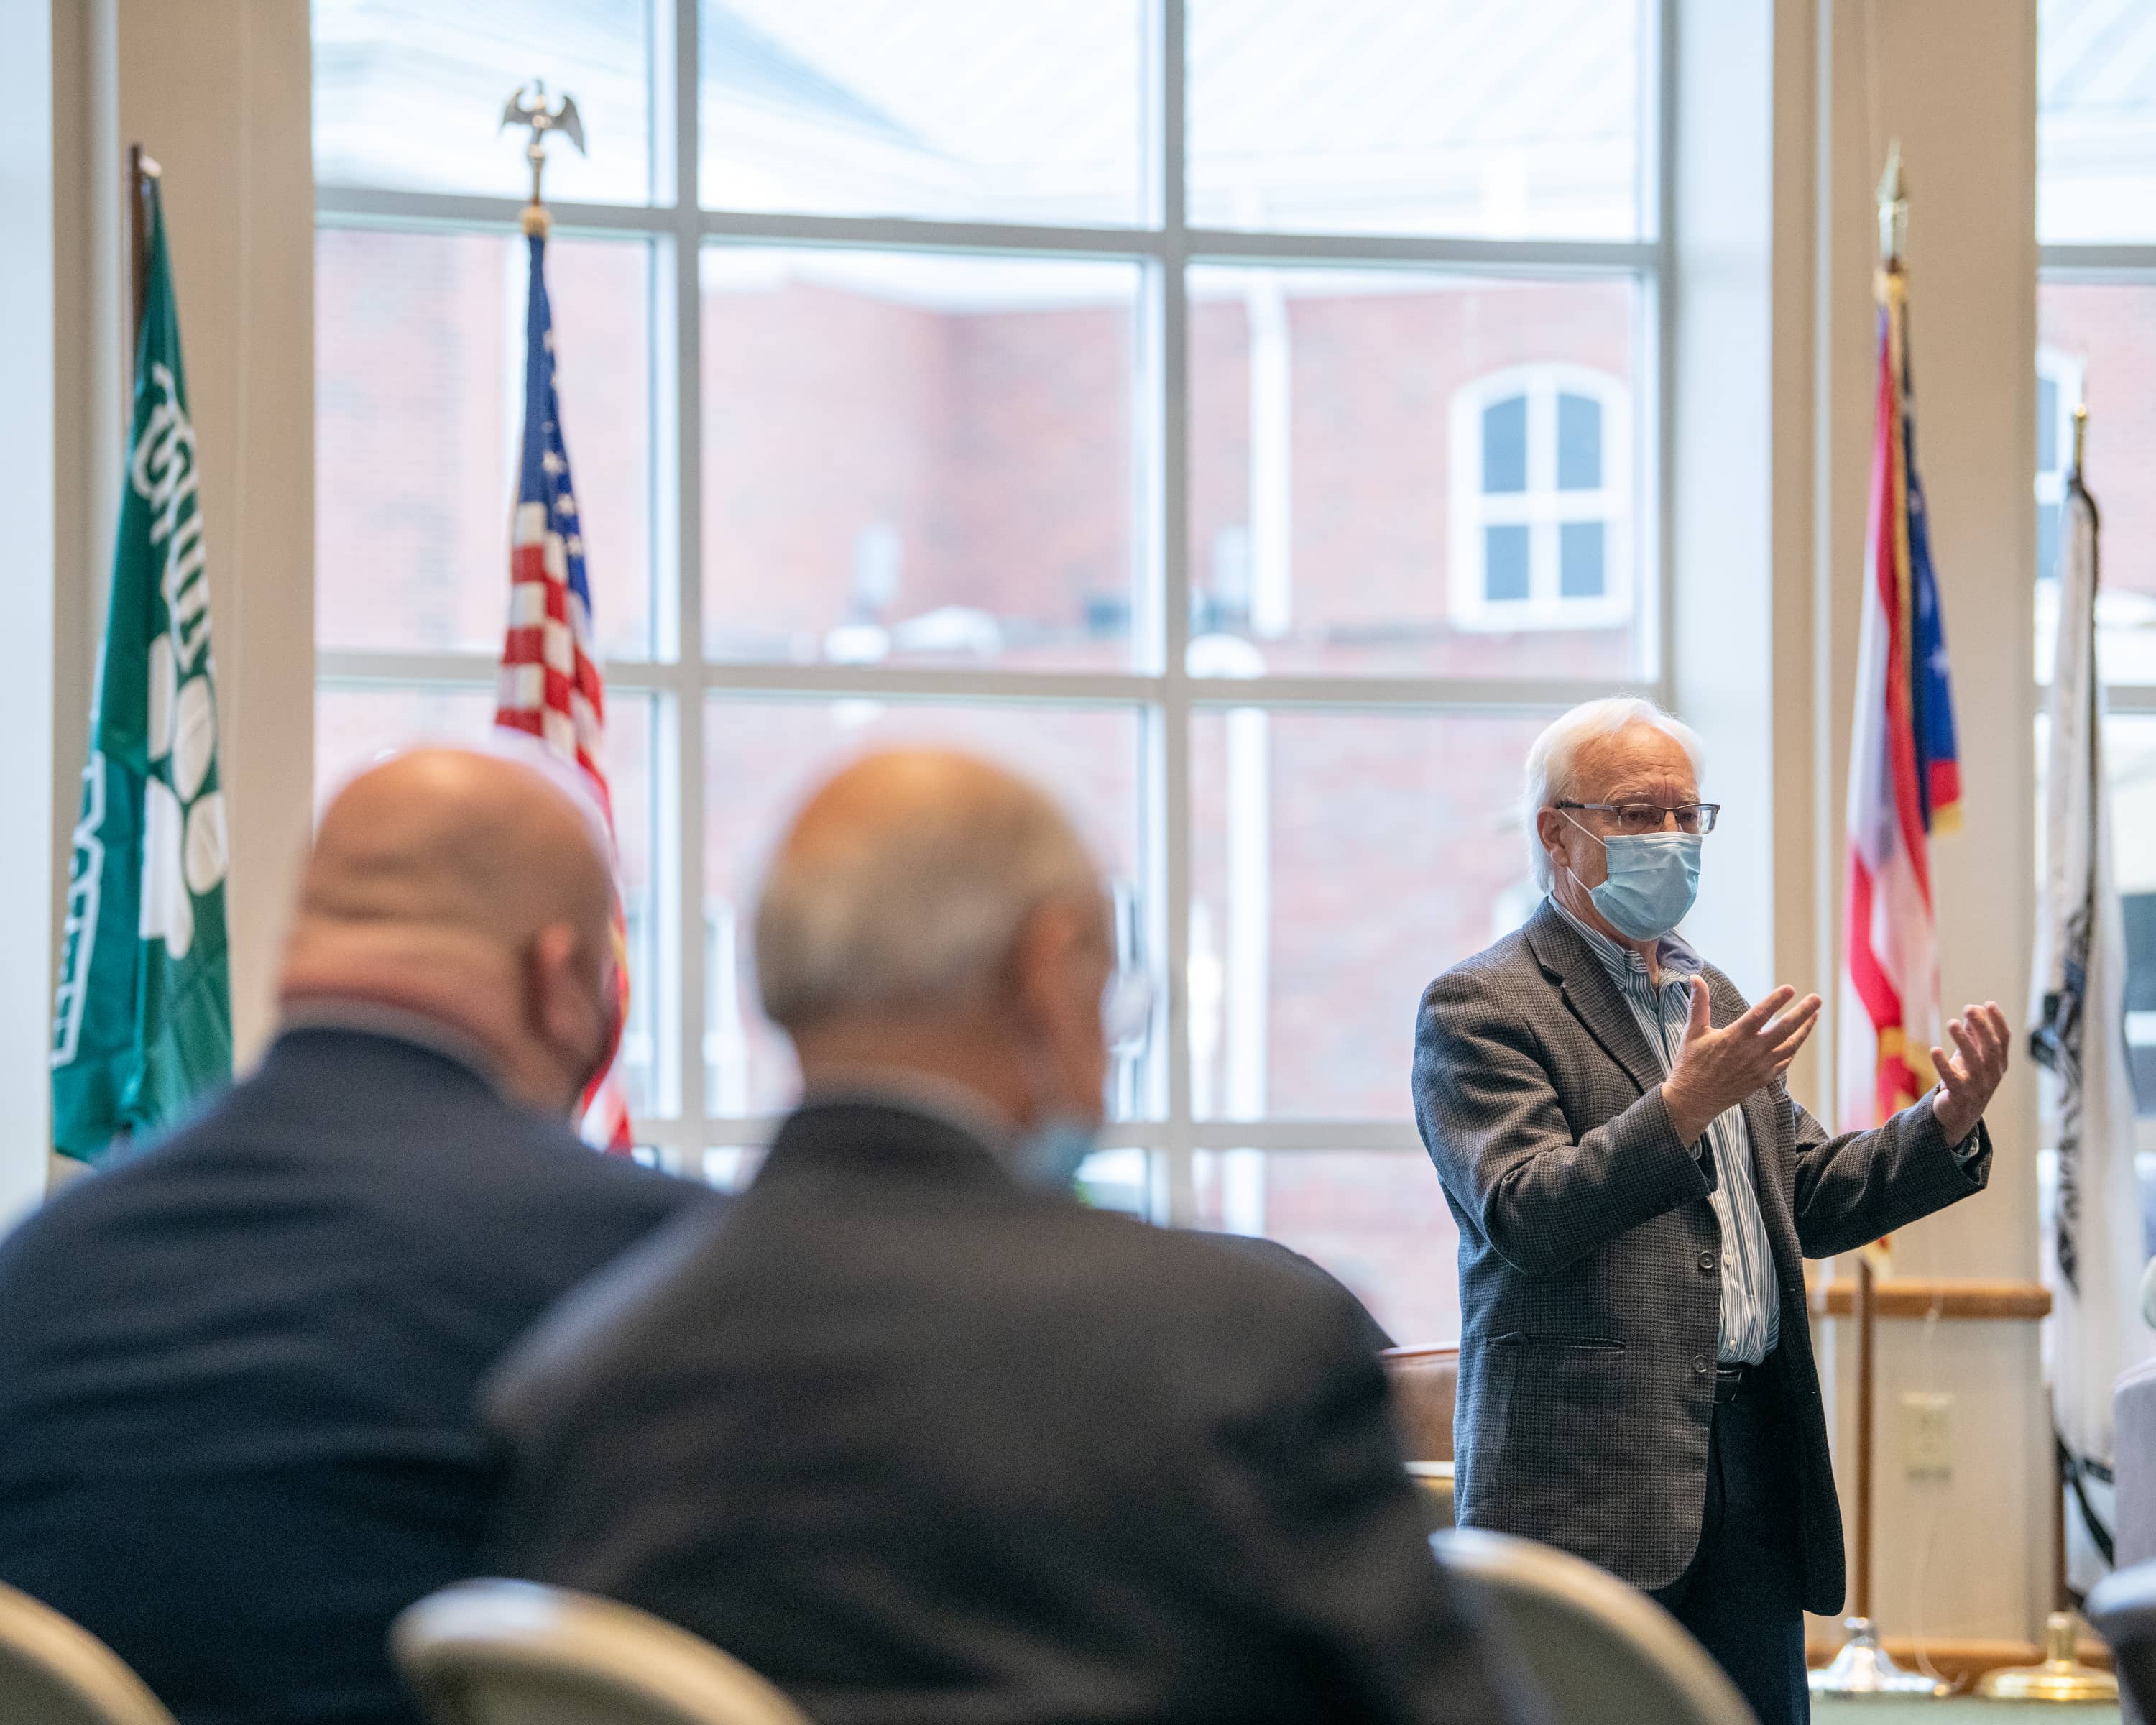 Over the backdrop of another beautiful fall day, Pres. Sherman met with OHIO Southern community members, engaging about the significance of the Ohio University campuses to their region.  